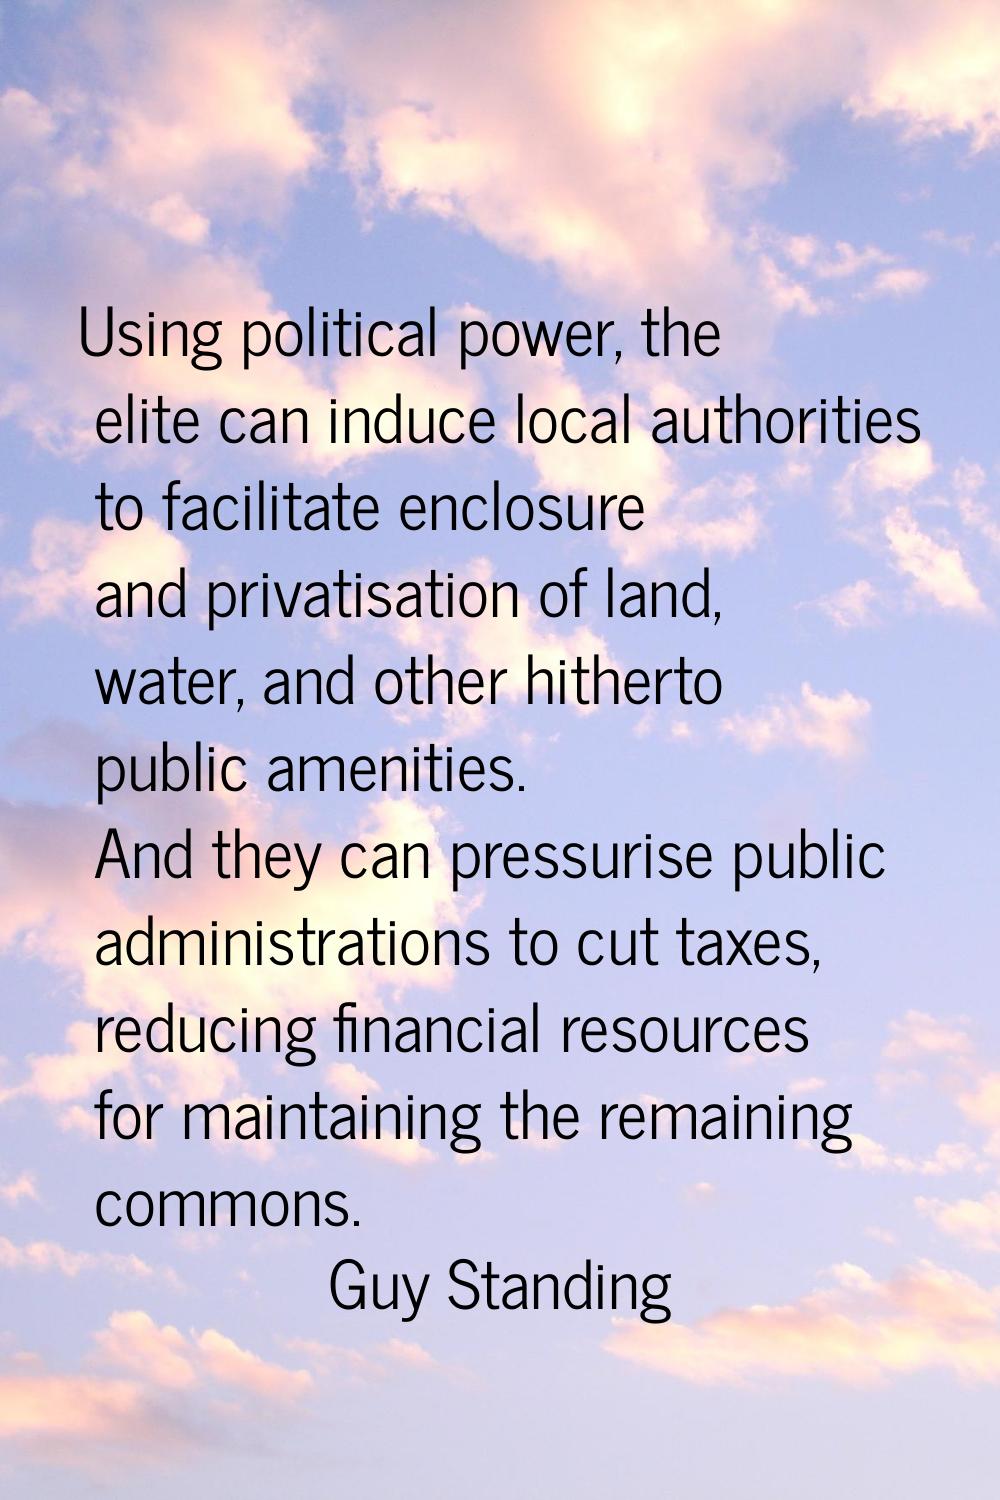 Using political power, the elite can induce local authorities to facilitate enclosure and privatisa